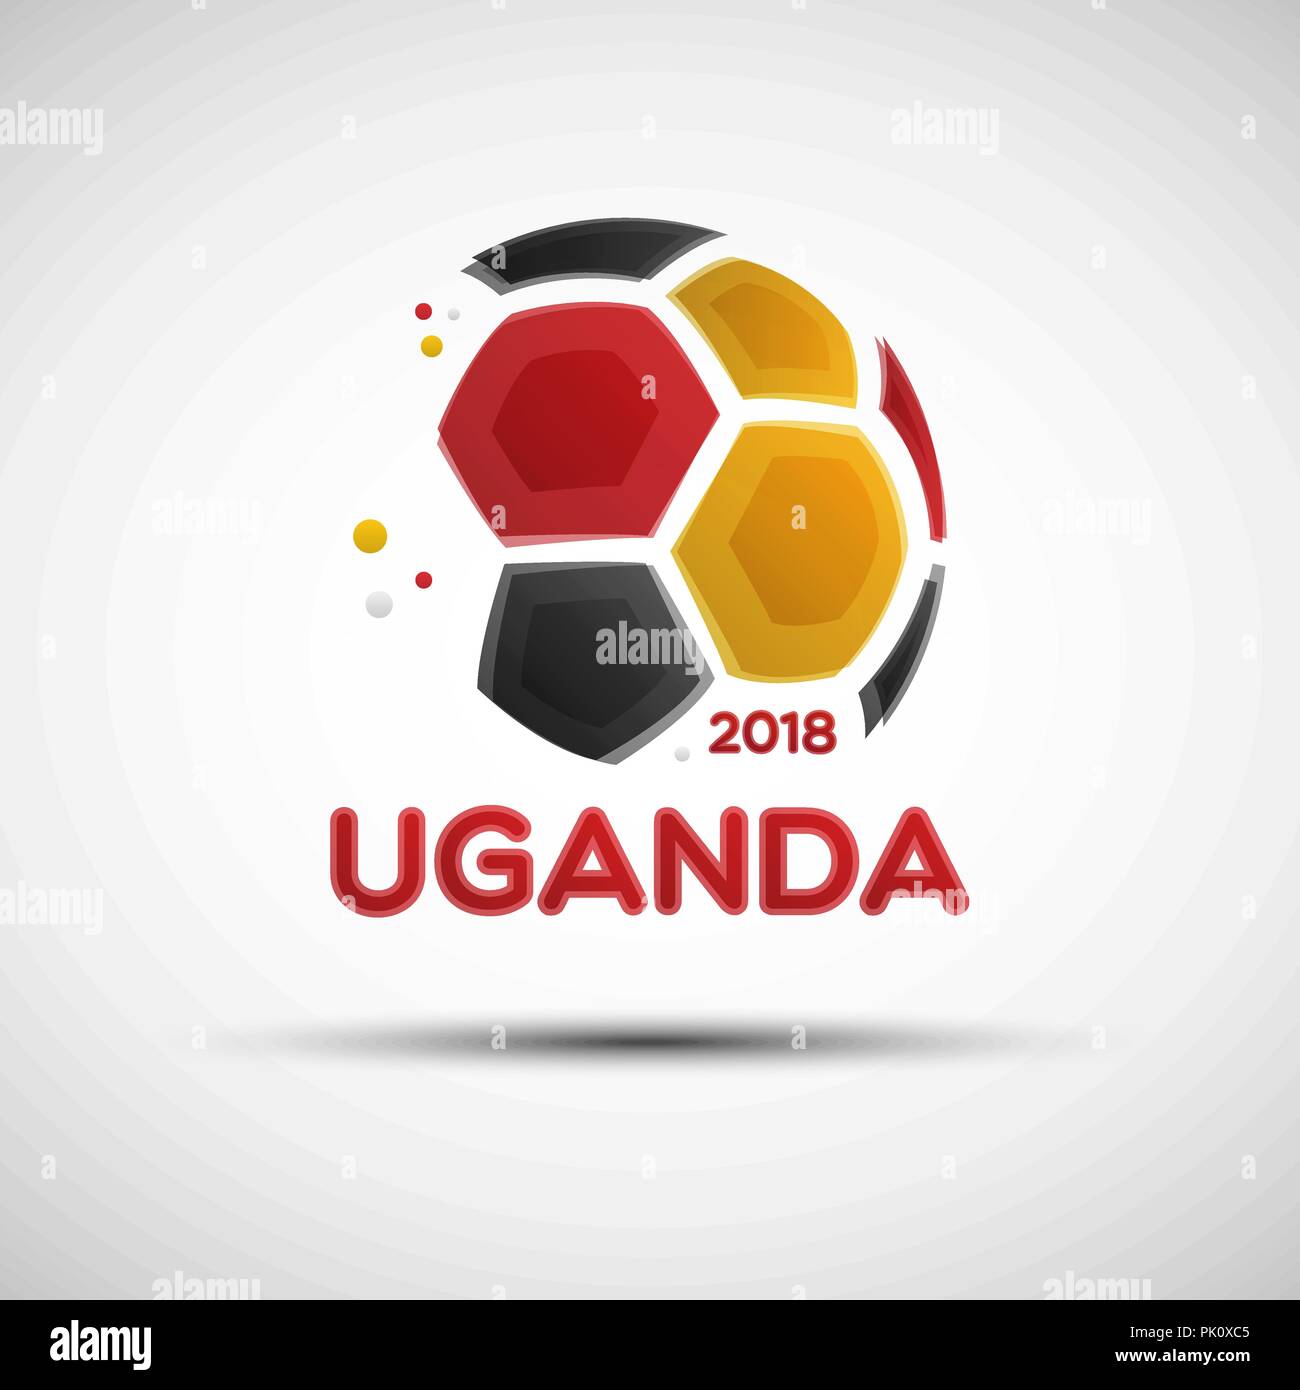 Football championship banner. Flag of Uganda. Vector illustration of abstract soccer ball with Republic of Uganda national flag colors for your design Stock Vector